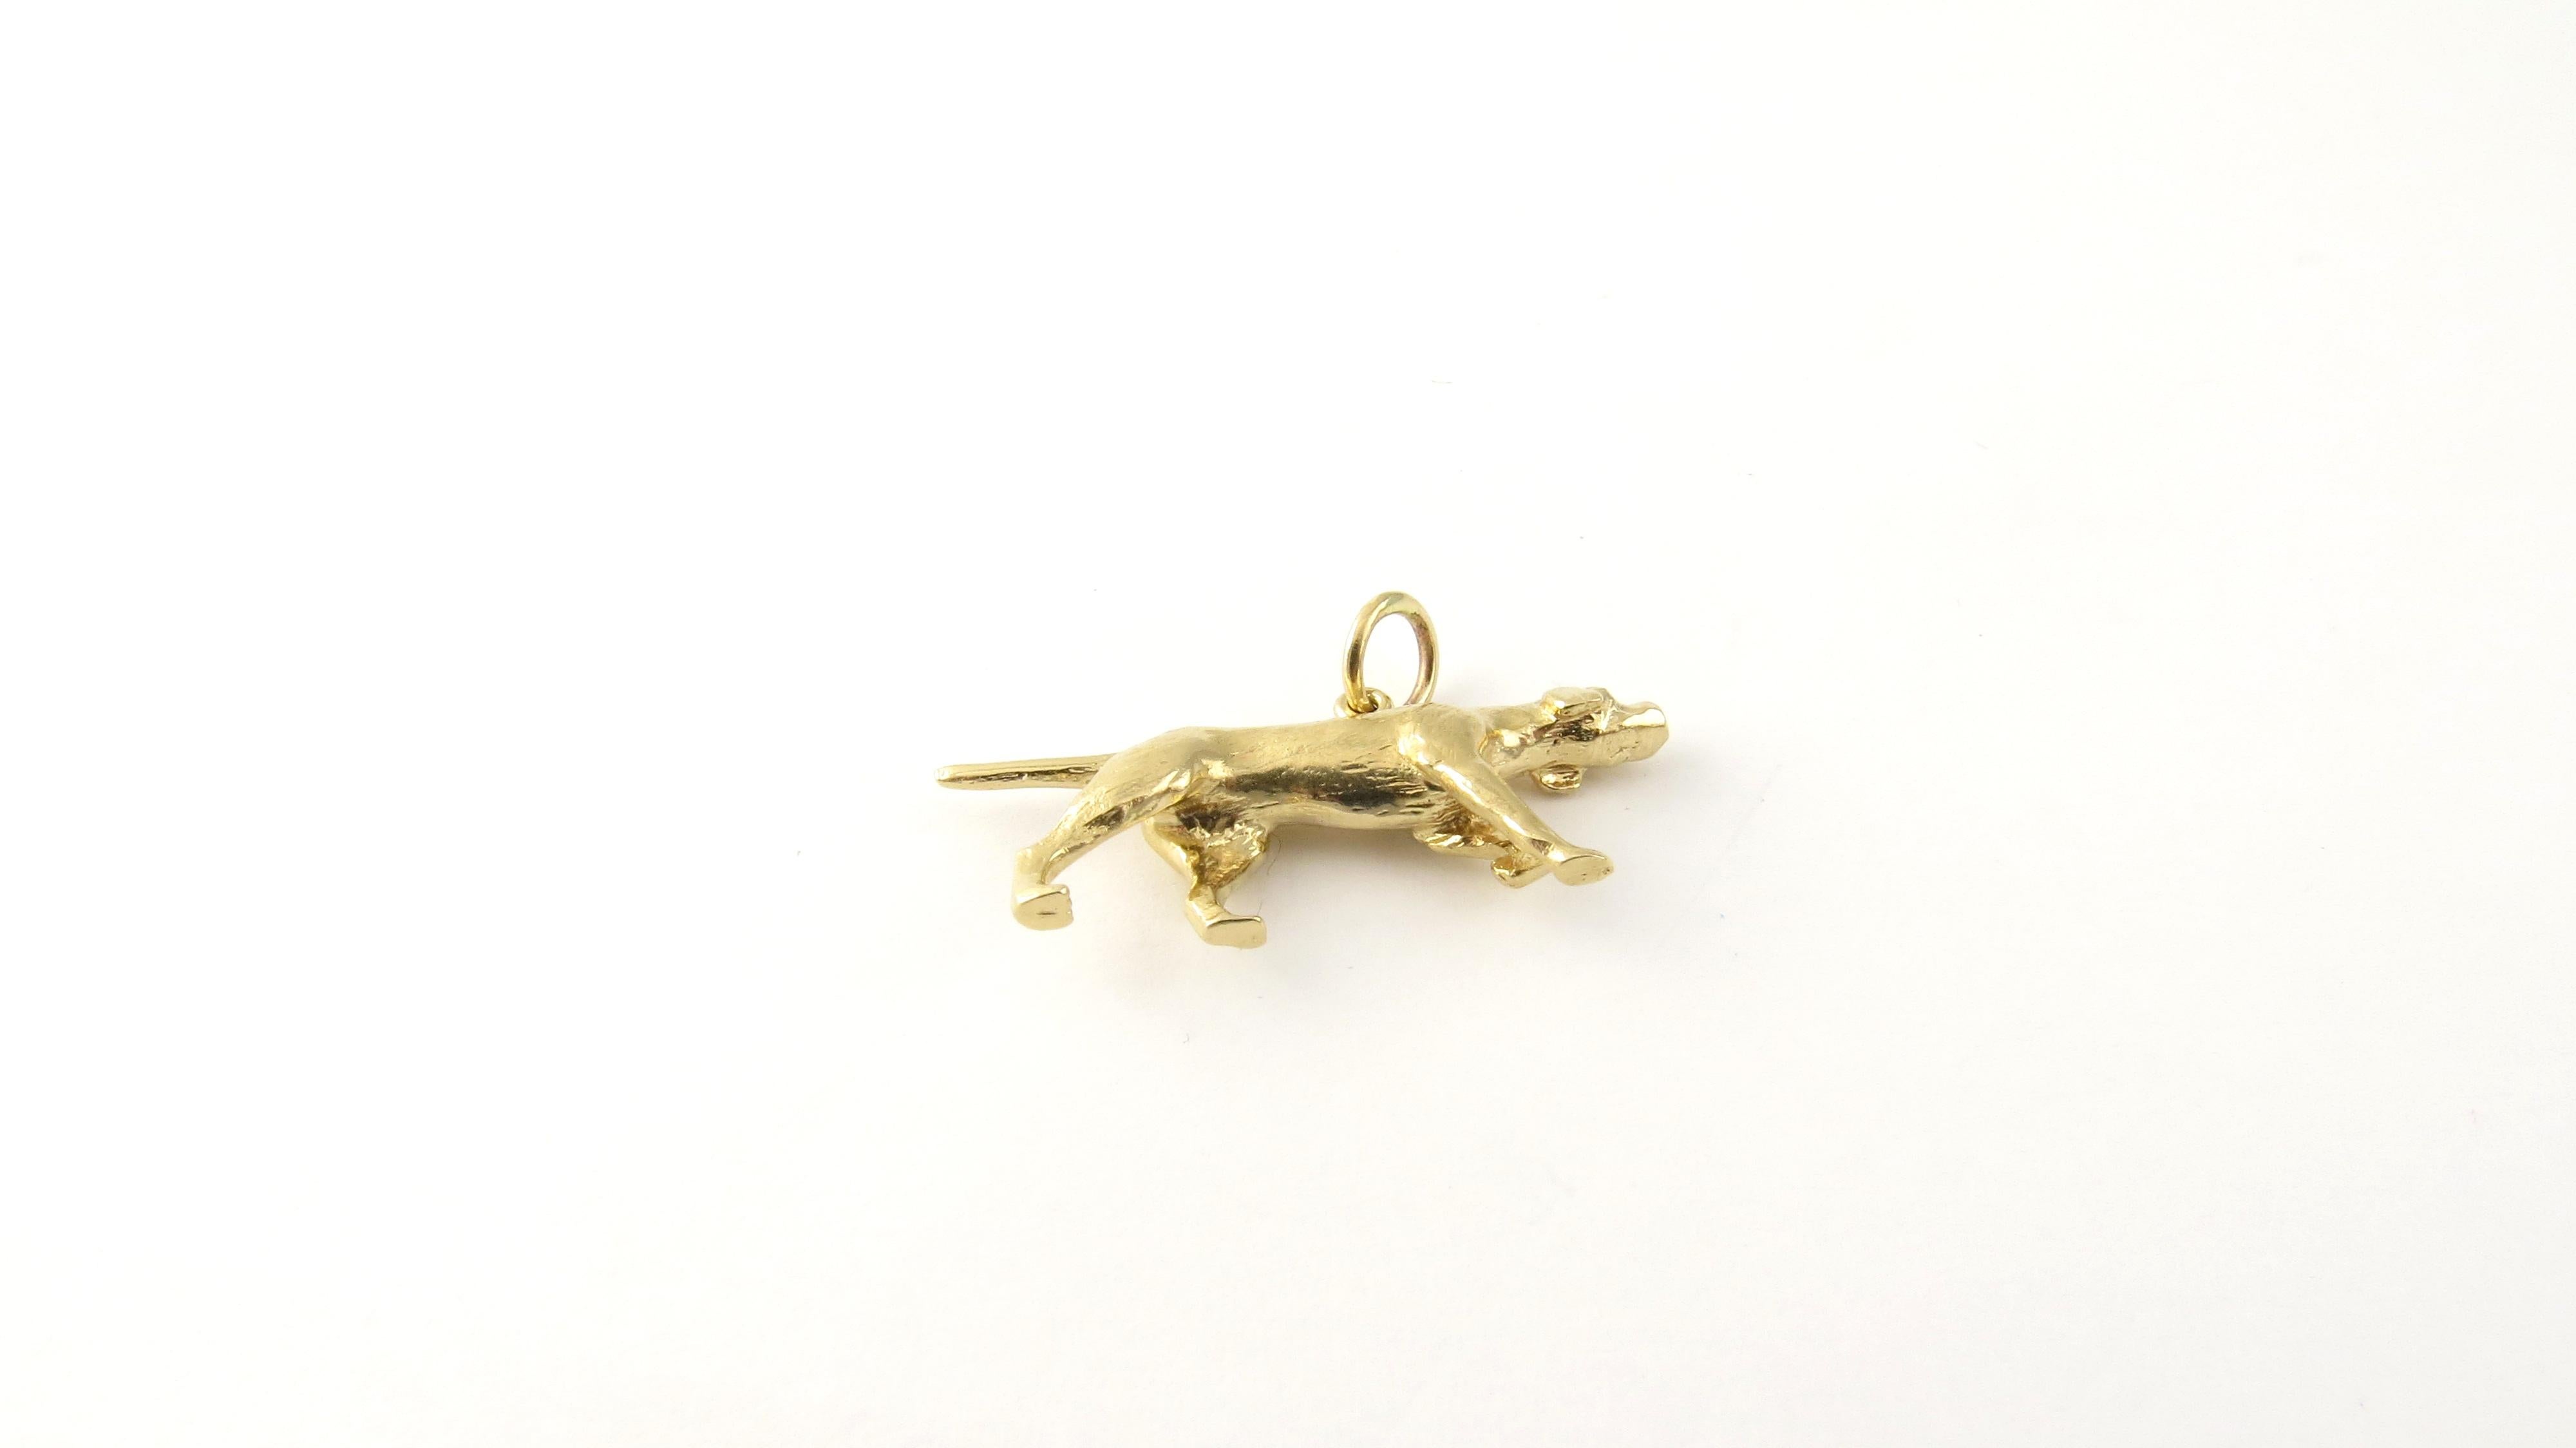 Vintage 14 Karat Yellow Gold Pointer Dog Charm.

The energetic and intelligent pointer dog has long been a family favorite!

This lovely 3D charm features a pointer dog in action meticulously detailed in 14K yellow gold.

Size: 14 mm x 31 mm (actual